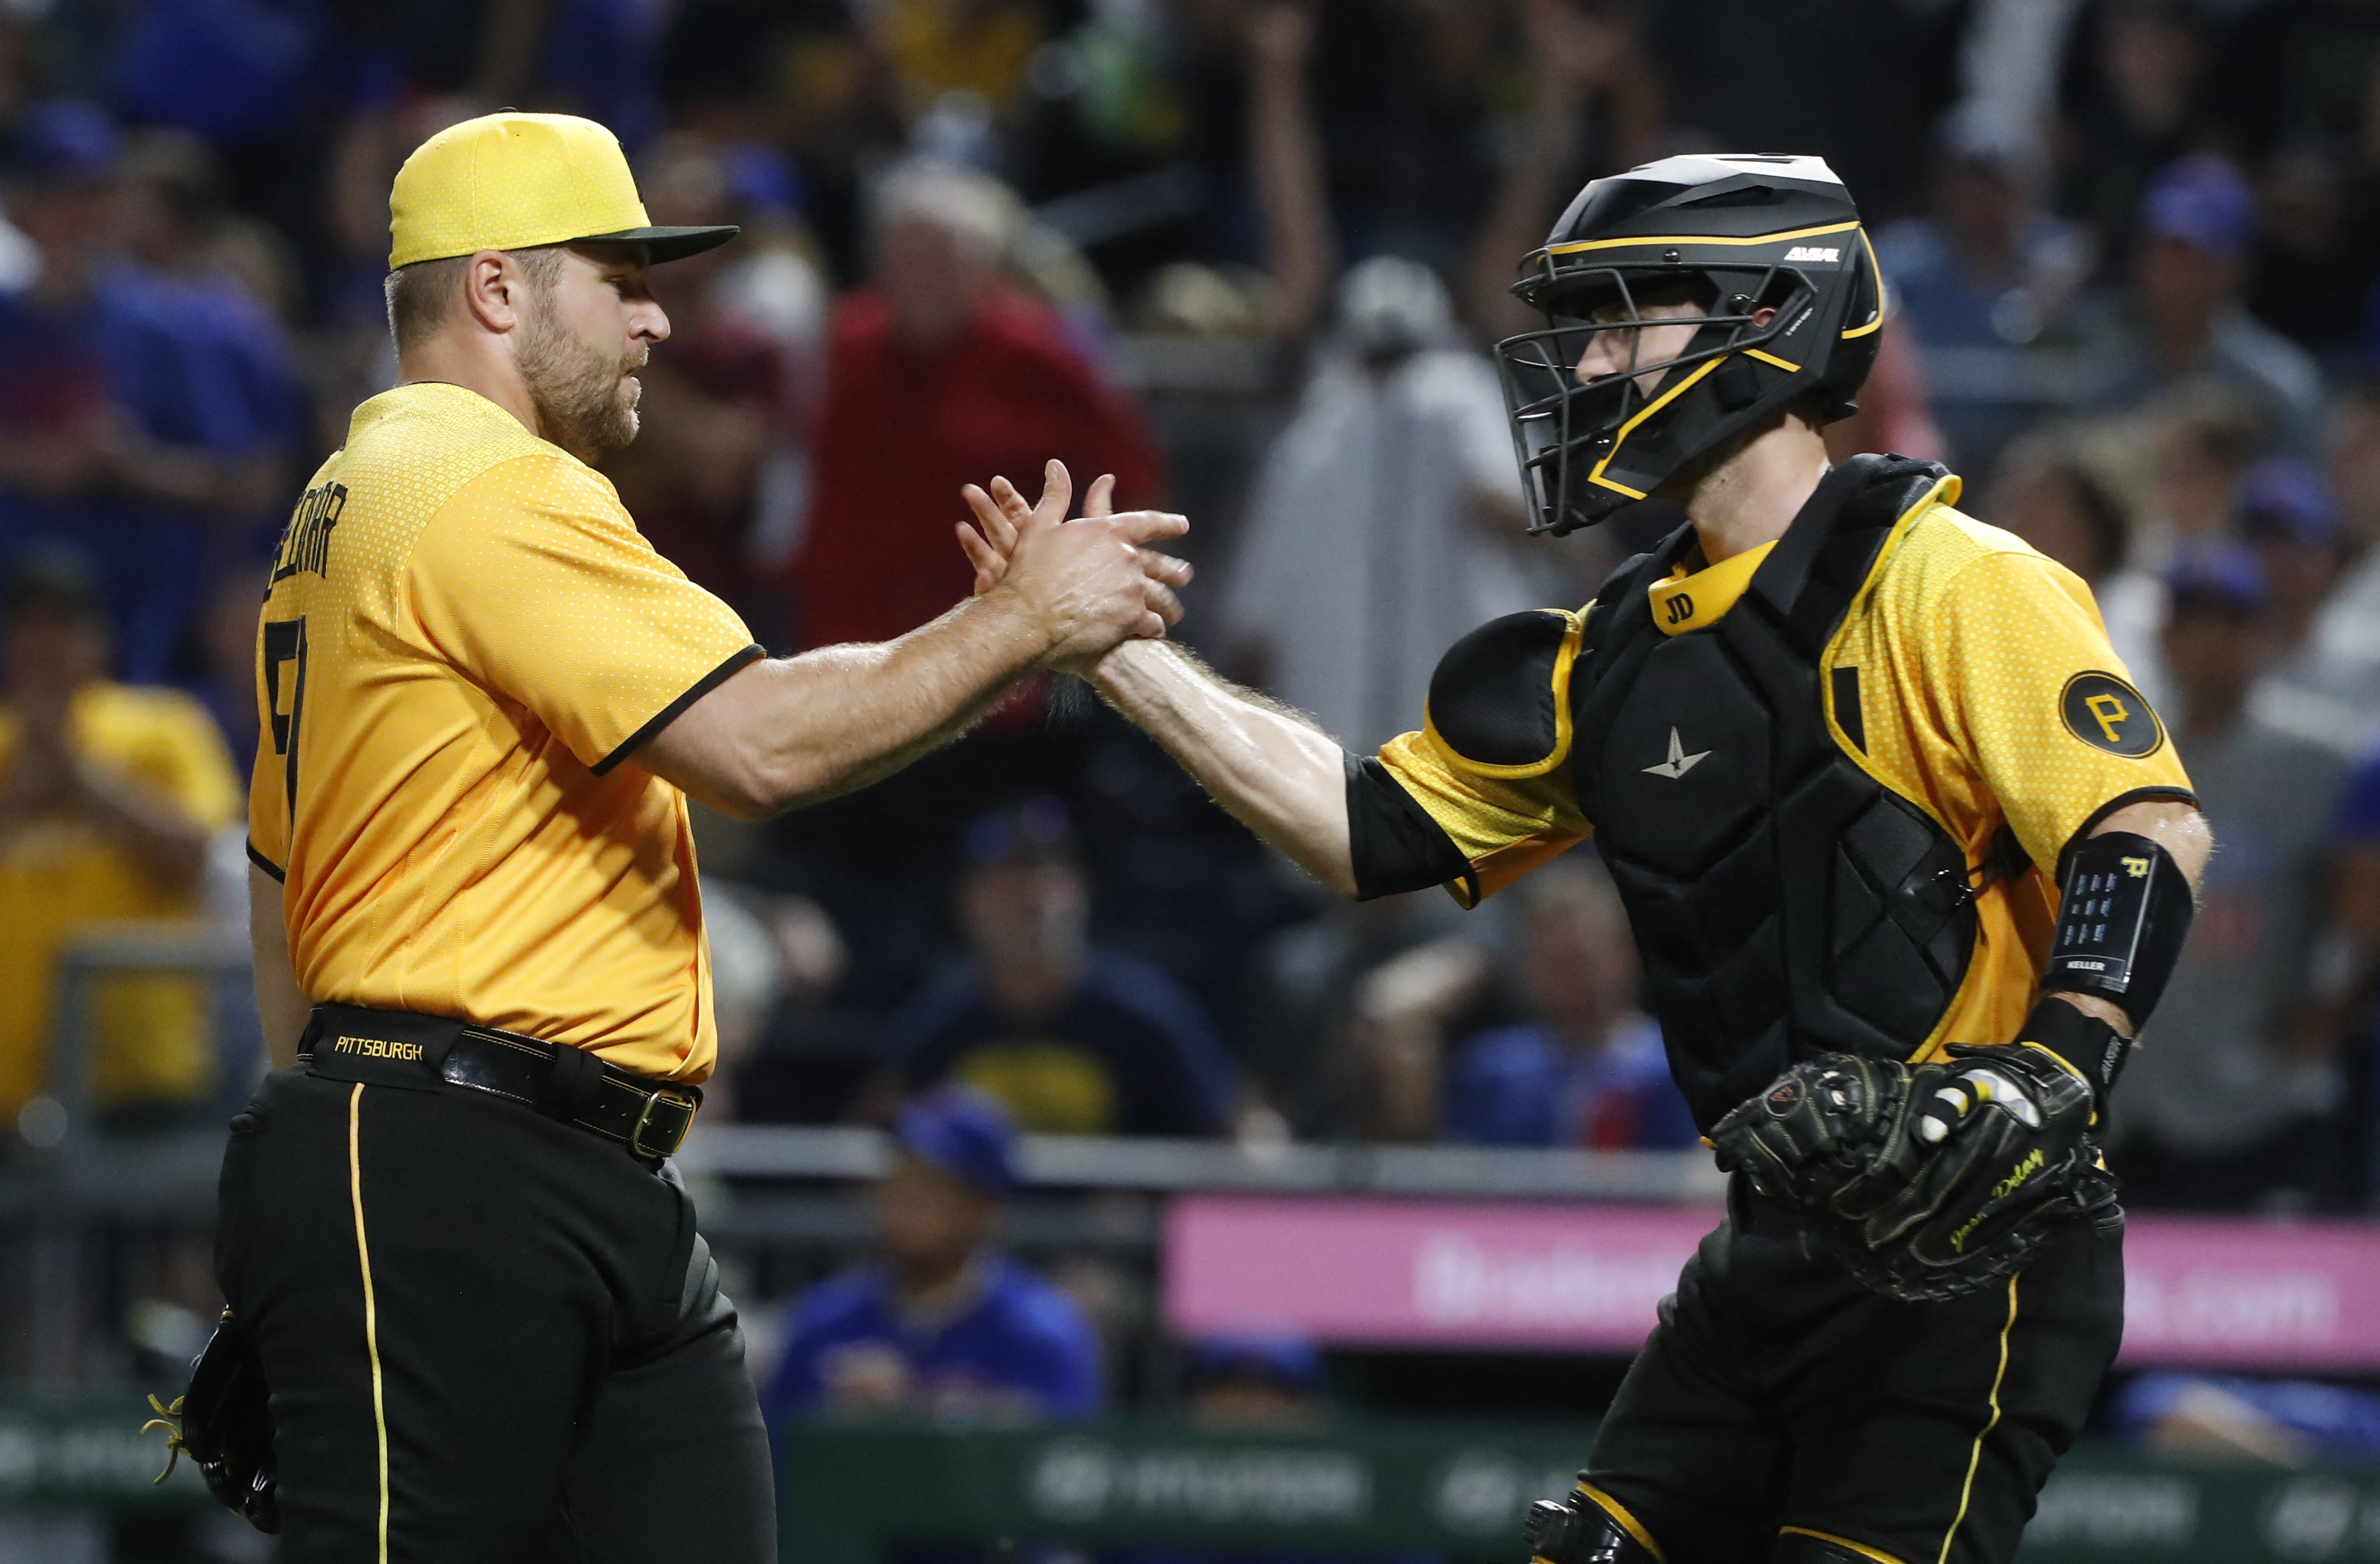 Pirates' Keller dominates with ample strikeout stuff, McCutchen drives in  season-high five in victory vs. Twins, Baseball